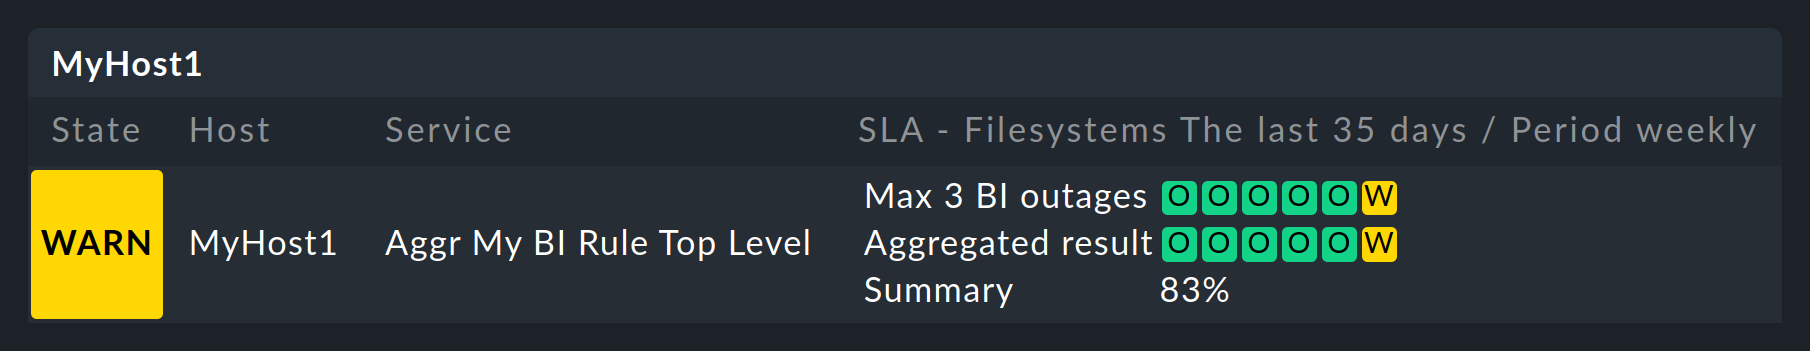 A view showing the SLA information for a BI aggregation.